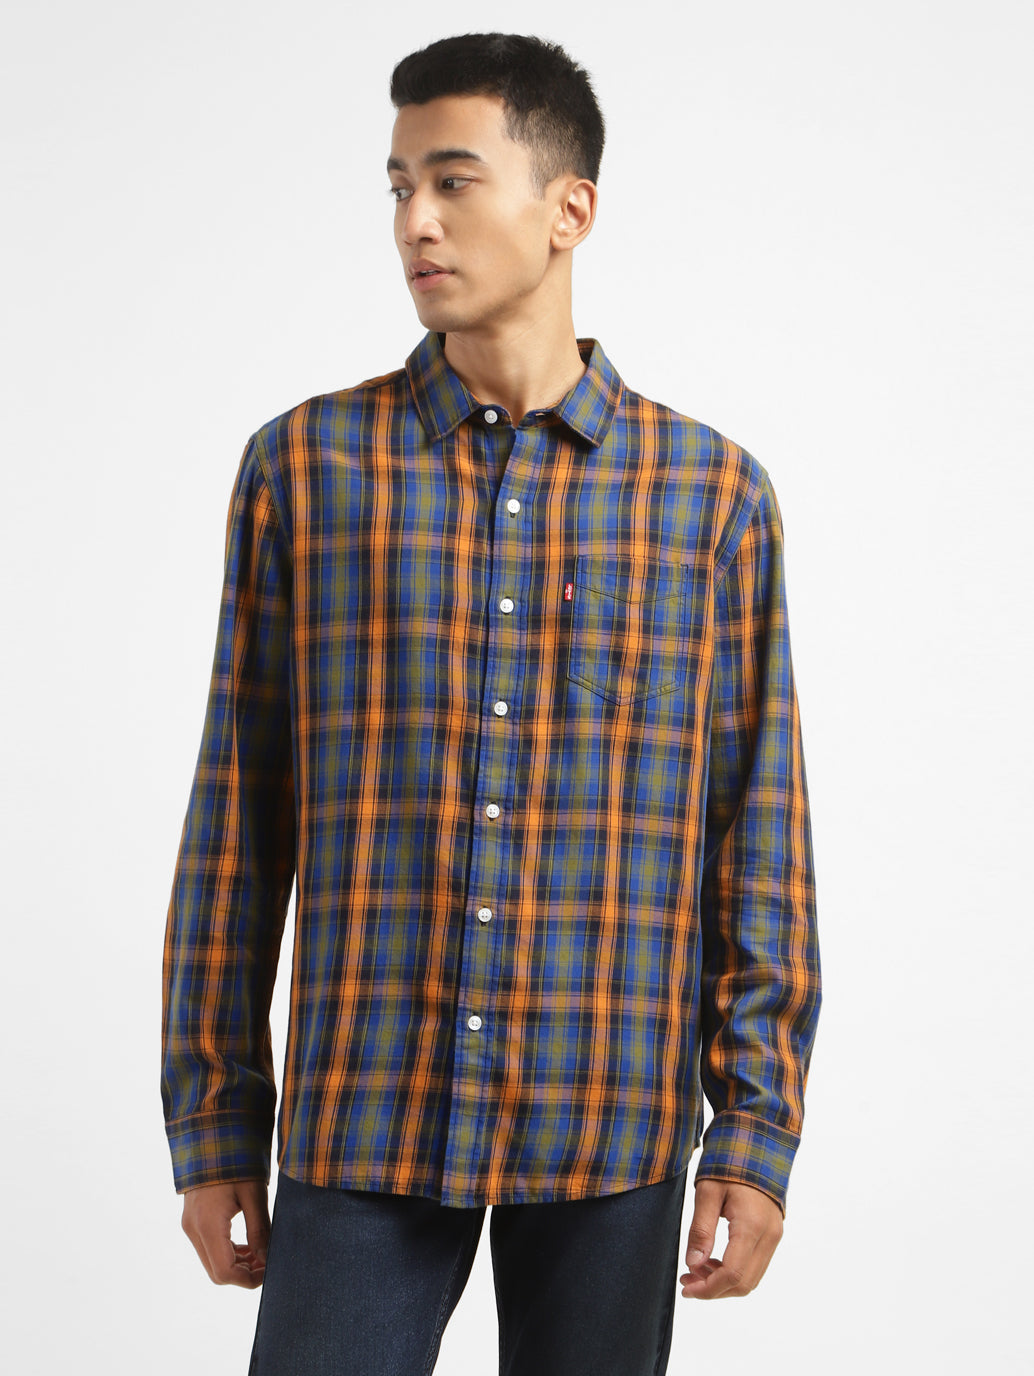 PULL & BEAR Mens Check Shirts Cotton Long Sleeve Soft Flannel